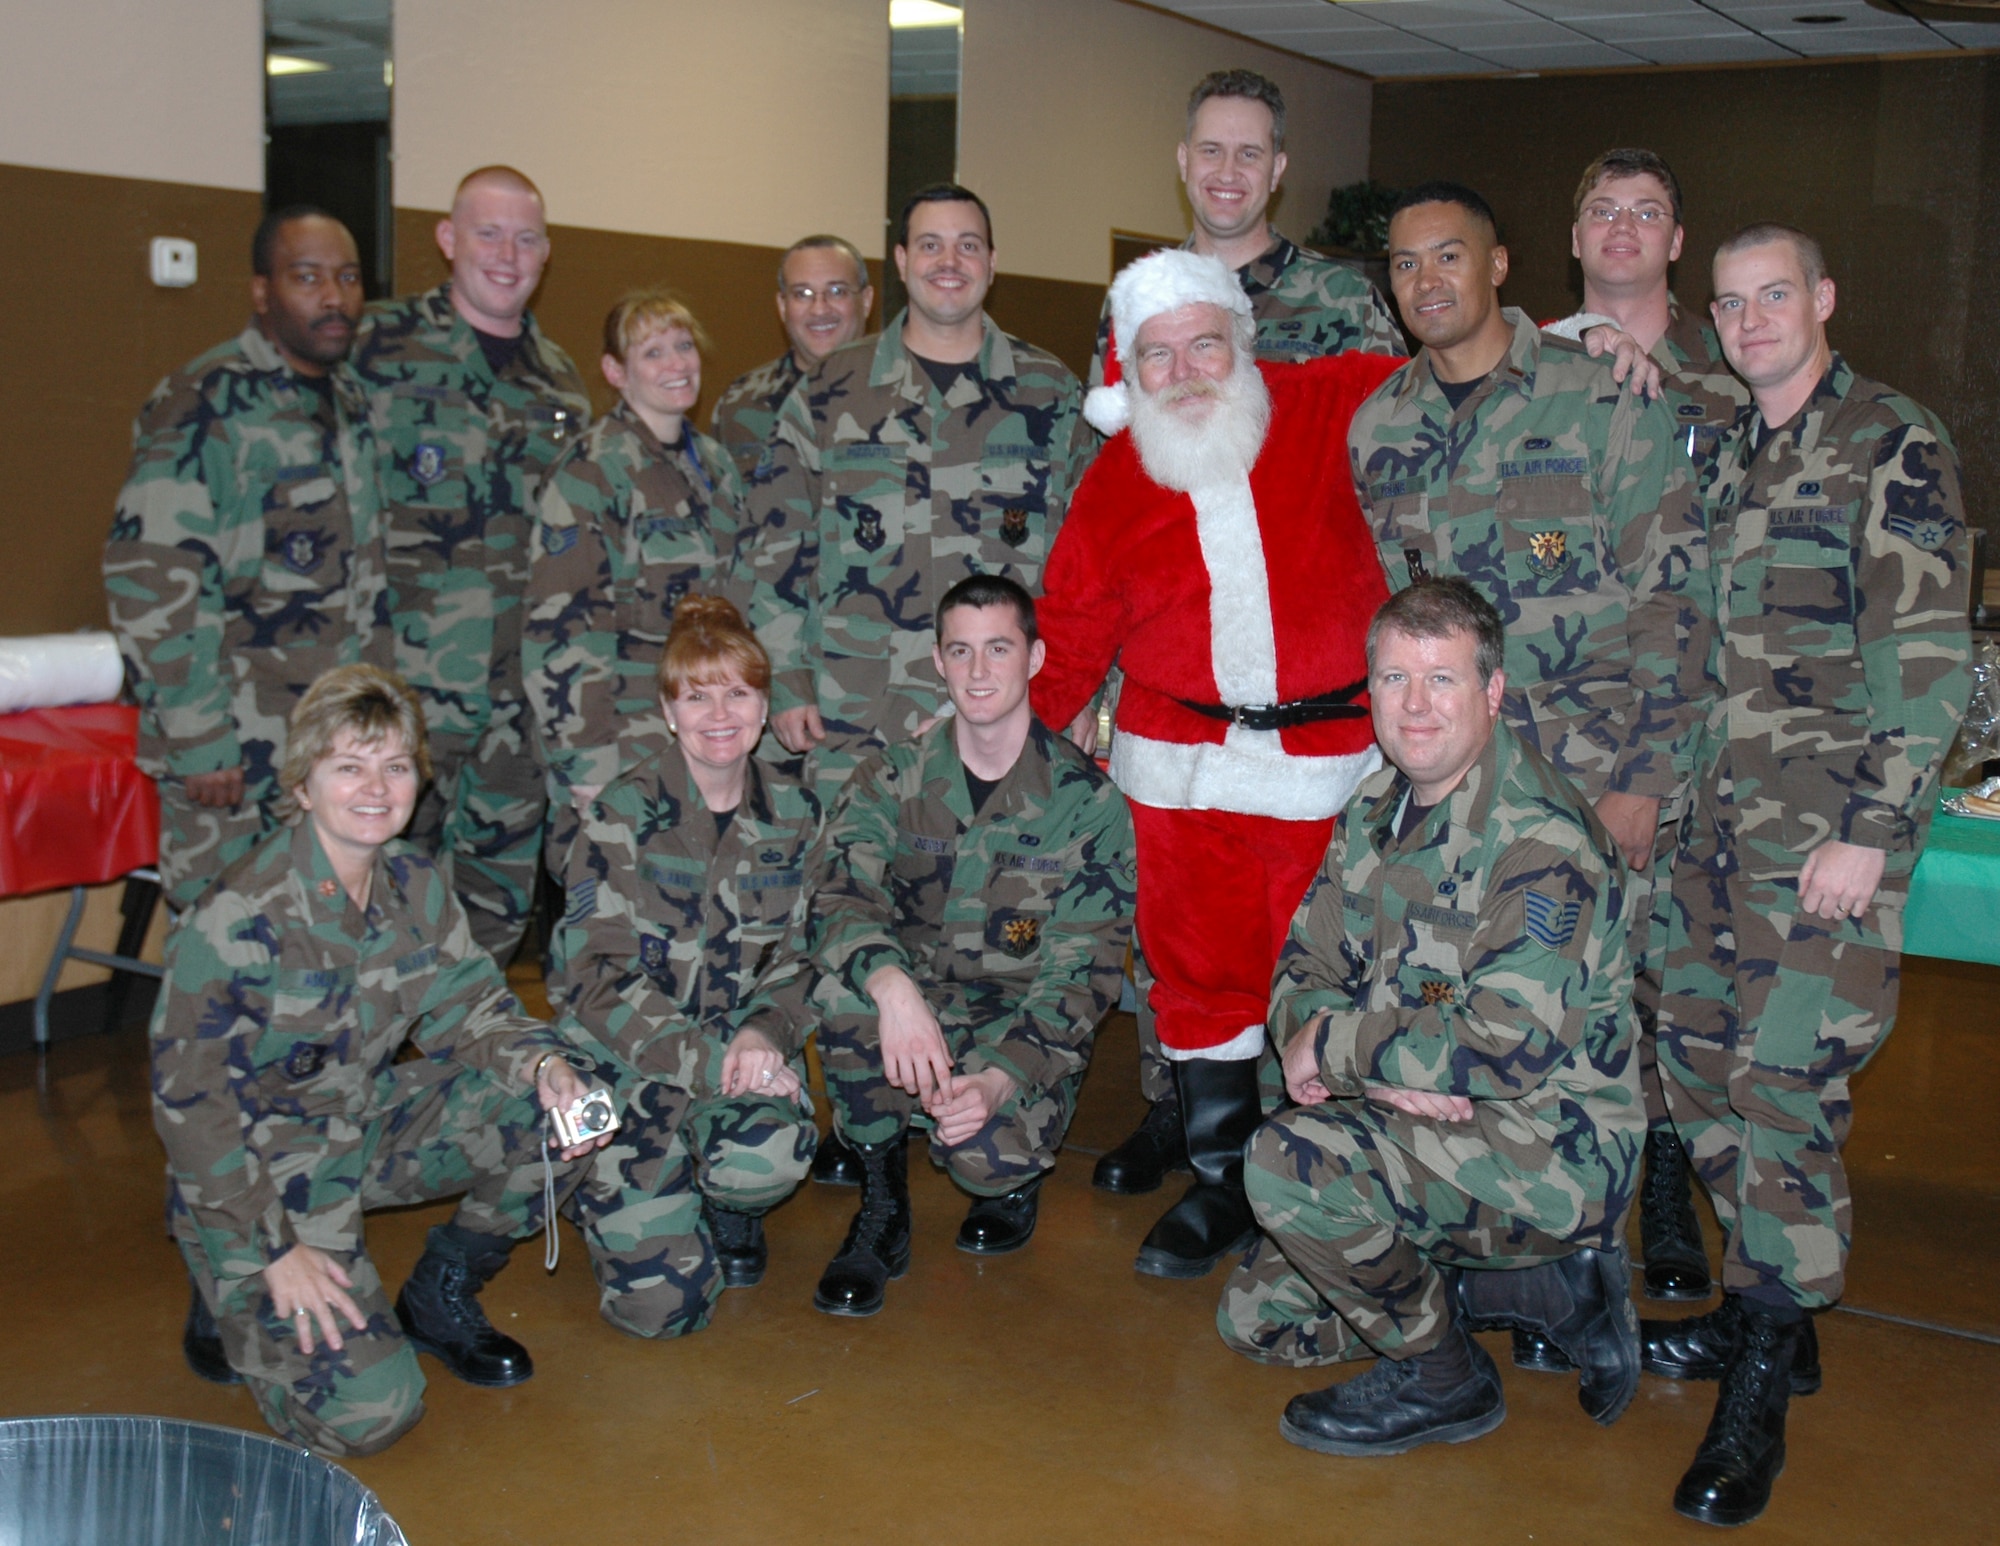 Members of the 944th Fighter Wing pose for a photo during the annual holiday kick off celebration at the American Italian Club in Phoenix on Dec. 2. Thirteen members of the wing visited with about 200 clients of the Valley of the Sun Habilitation School, an event the wing has participated in for more than 20 years. (U.S. Air Force photo/Tech. Sgt. Barbara Plante)